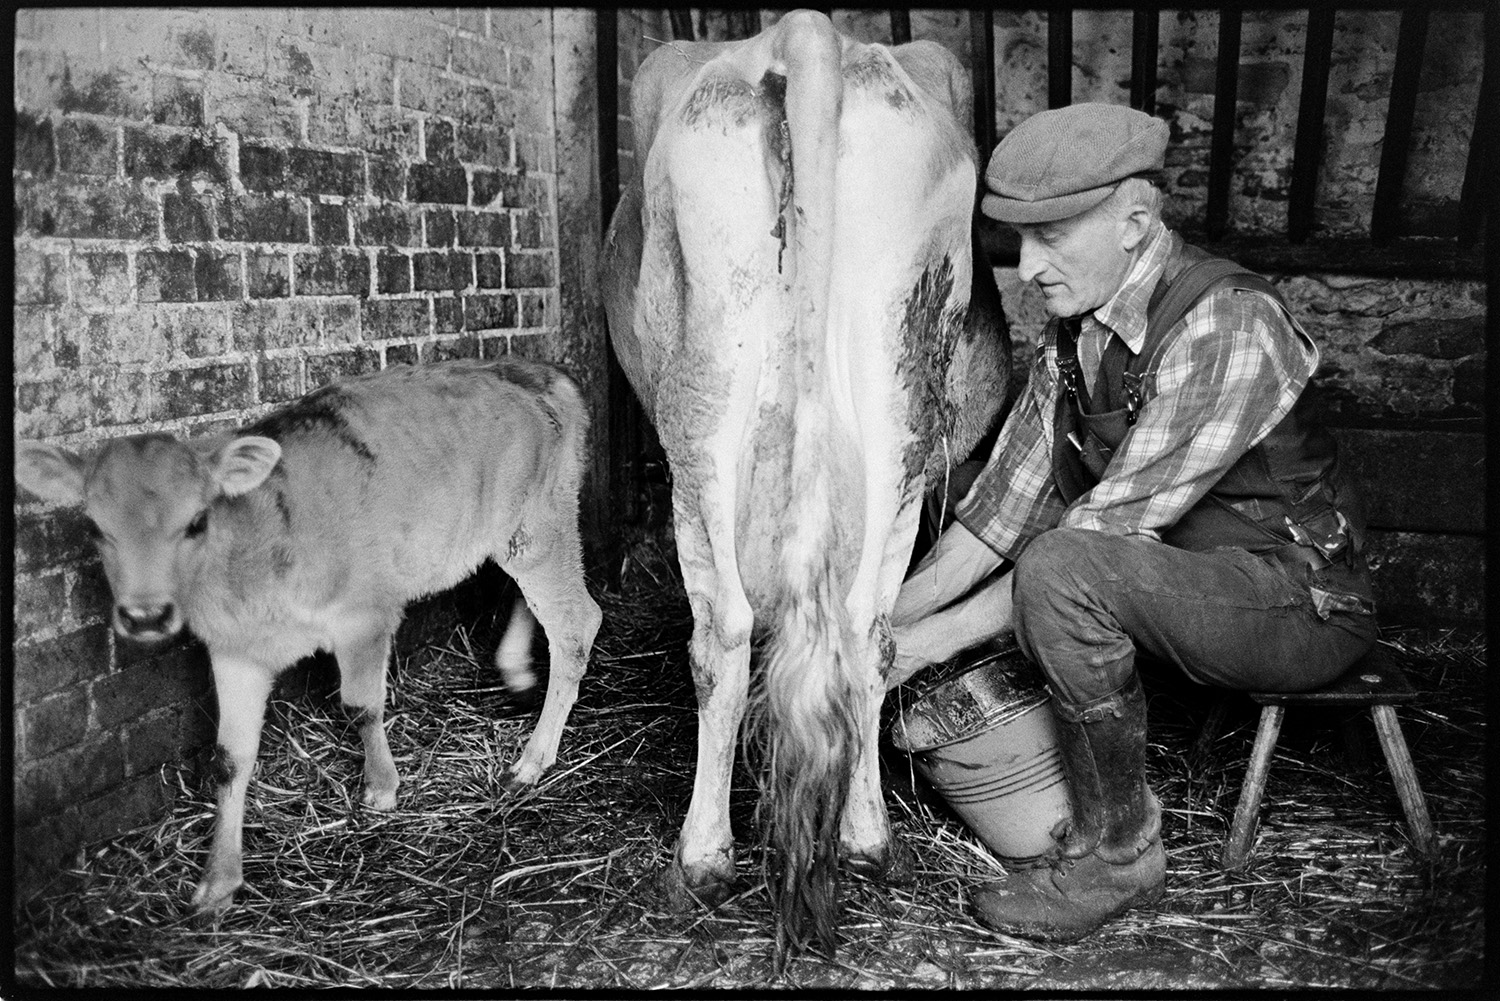 Farmer milking cow by hand and putting out churn, cow and calf. 
[Gordon Sanders milking a cow by hand in a brick barn or milking parlour at Reynards Park, Ashreigney. He is sat on a milking stool and a calf is stood by the cow.]